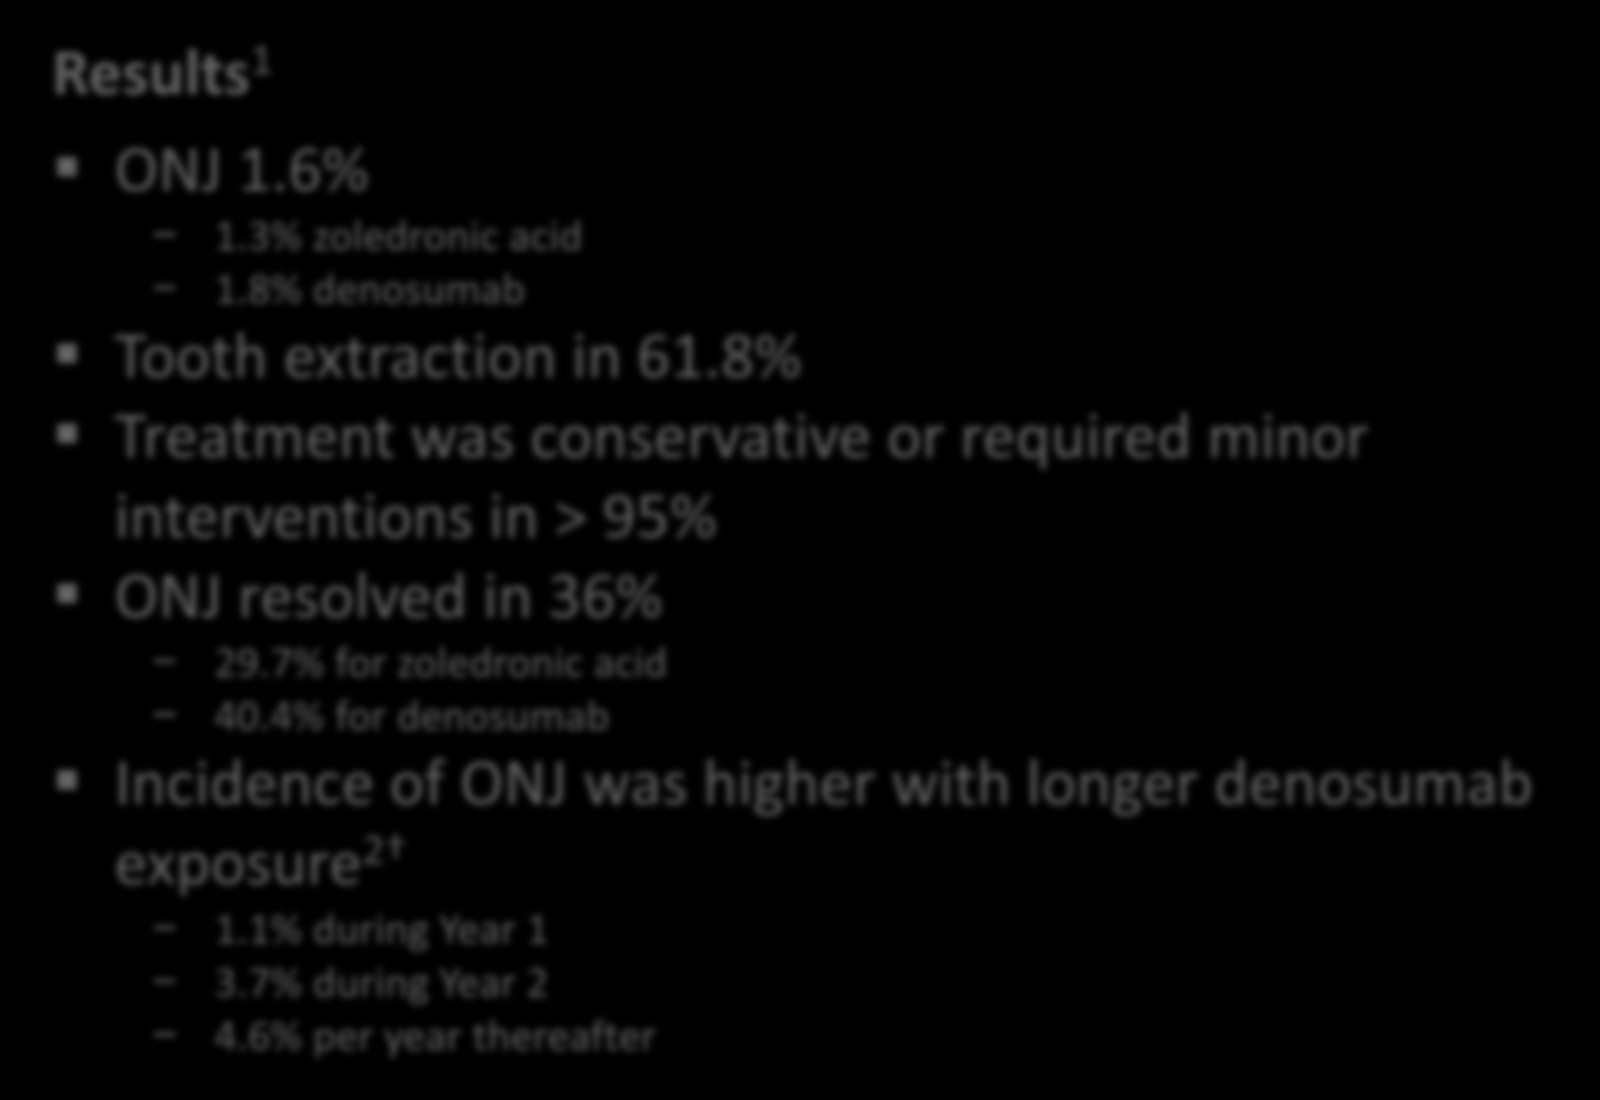 10 Results 1 ONJ 1.6% 1.3% zoledronic acid 1.8% denosumab Tooth extraction in 61.8% Treatment was conservative or required minor interventions in > 95% ONJ resolved in 36% 29.